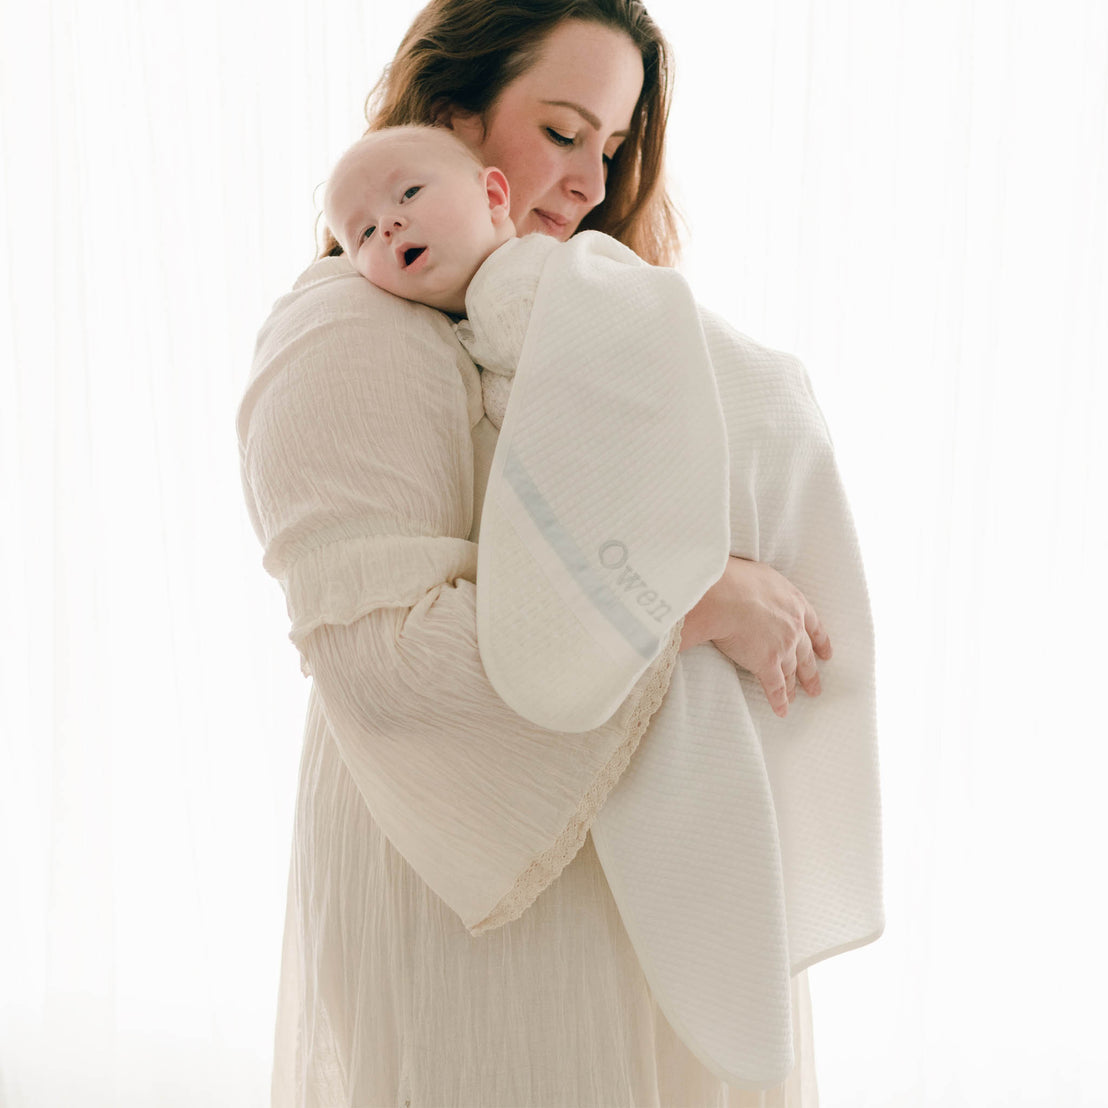 Photo of a mother and her baby wrapped in the Owen Personalized Blanket. The corner features an ivory knit and the name "Owen" embroidered with light blue thread